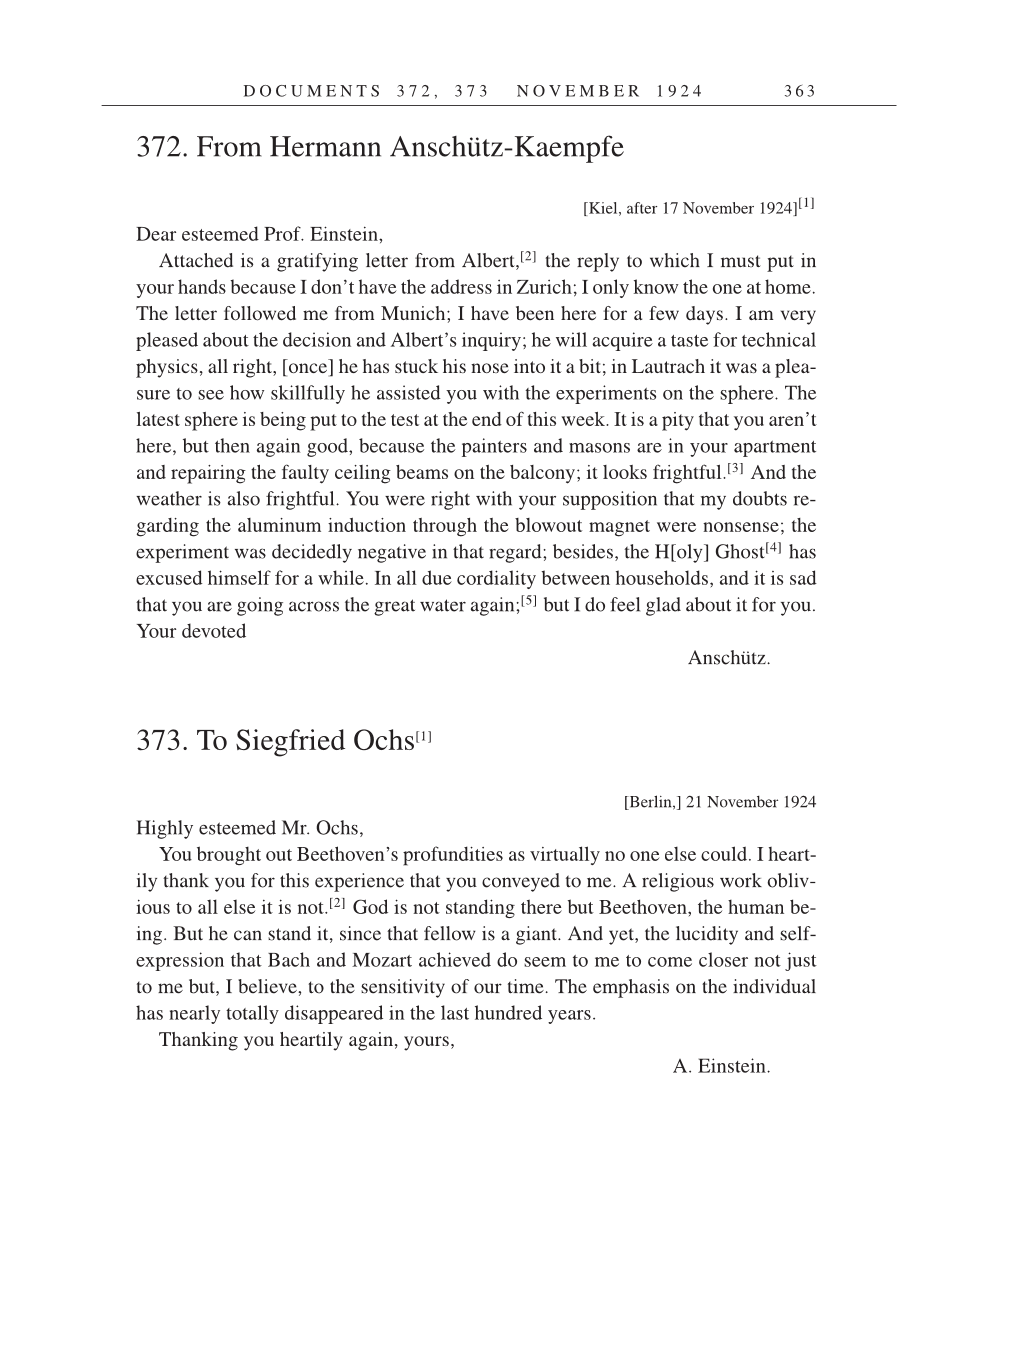 Volume 14: The Berlin Years: Writings & Correspondence, April 1923-May 1925 (English Translation Supplement) page 363